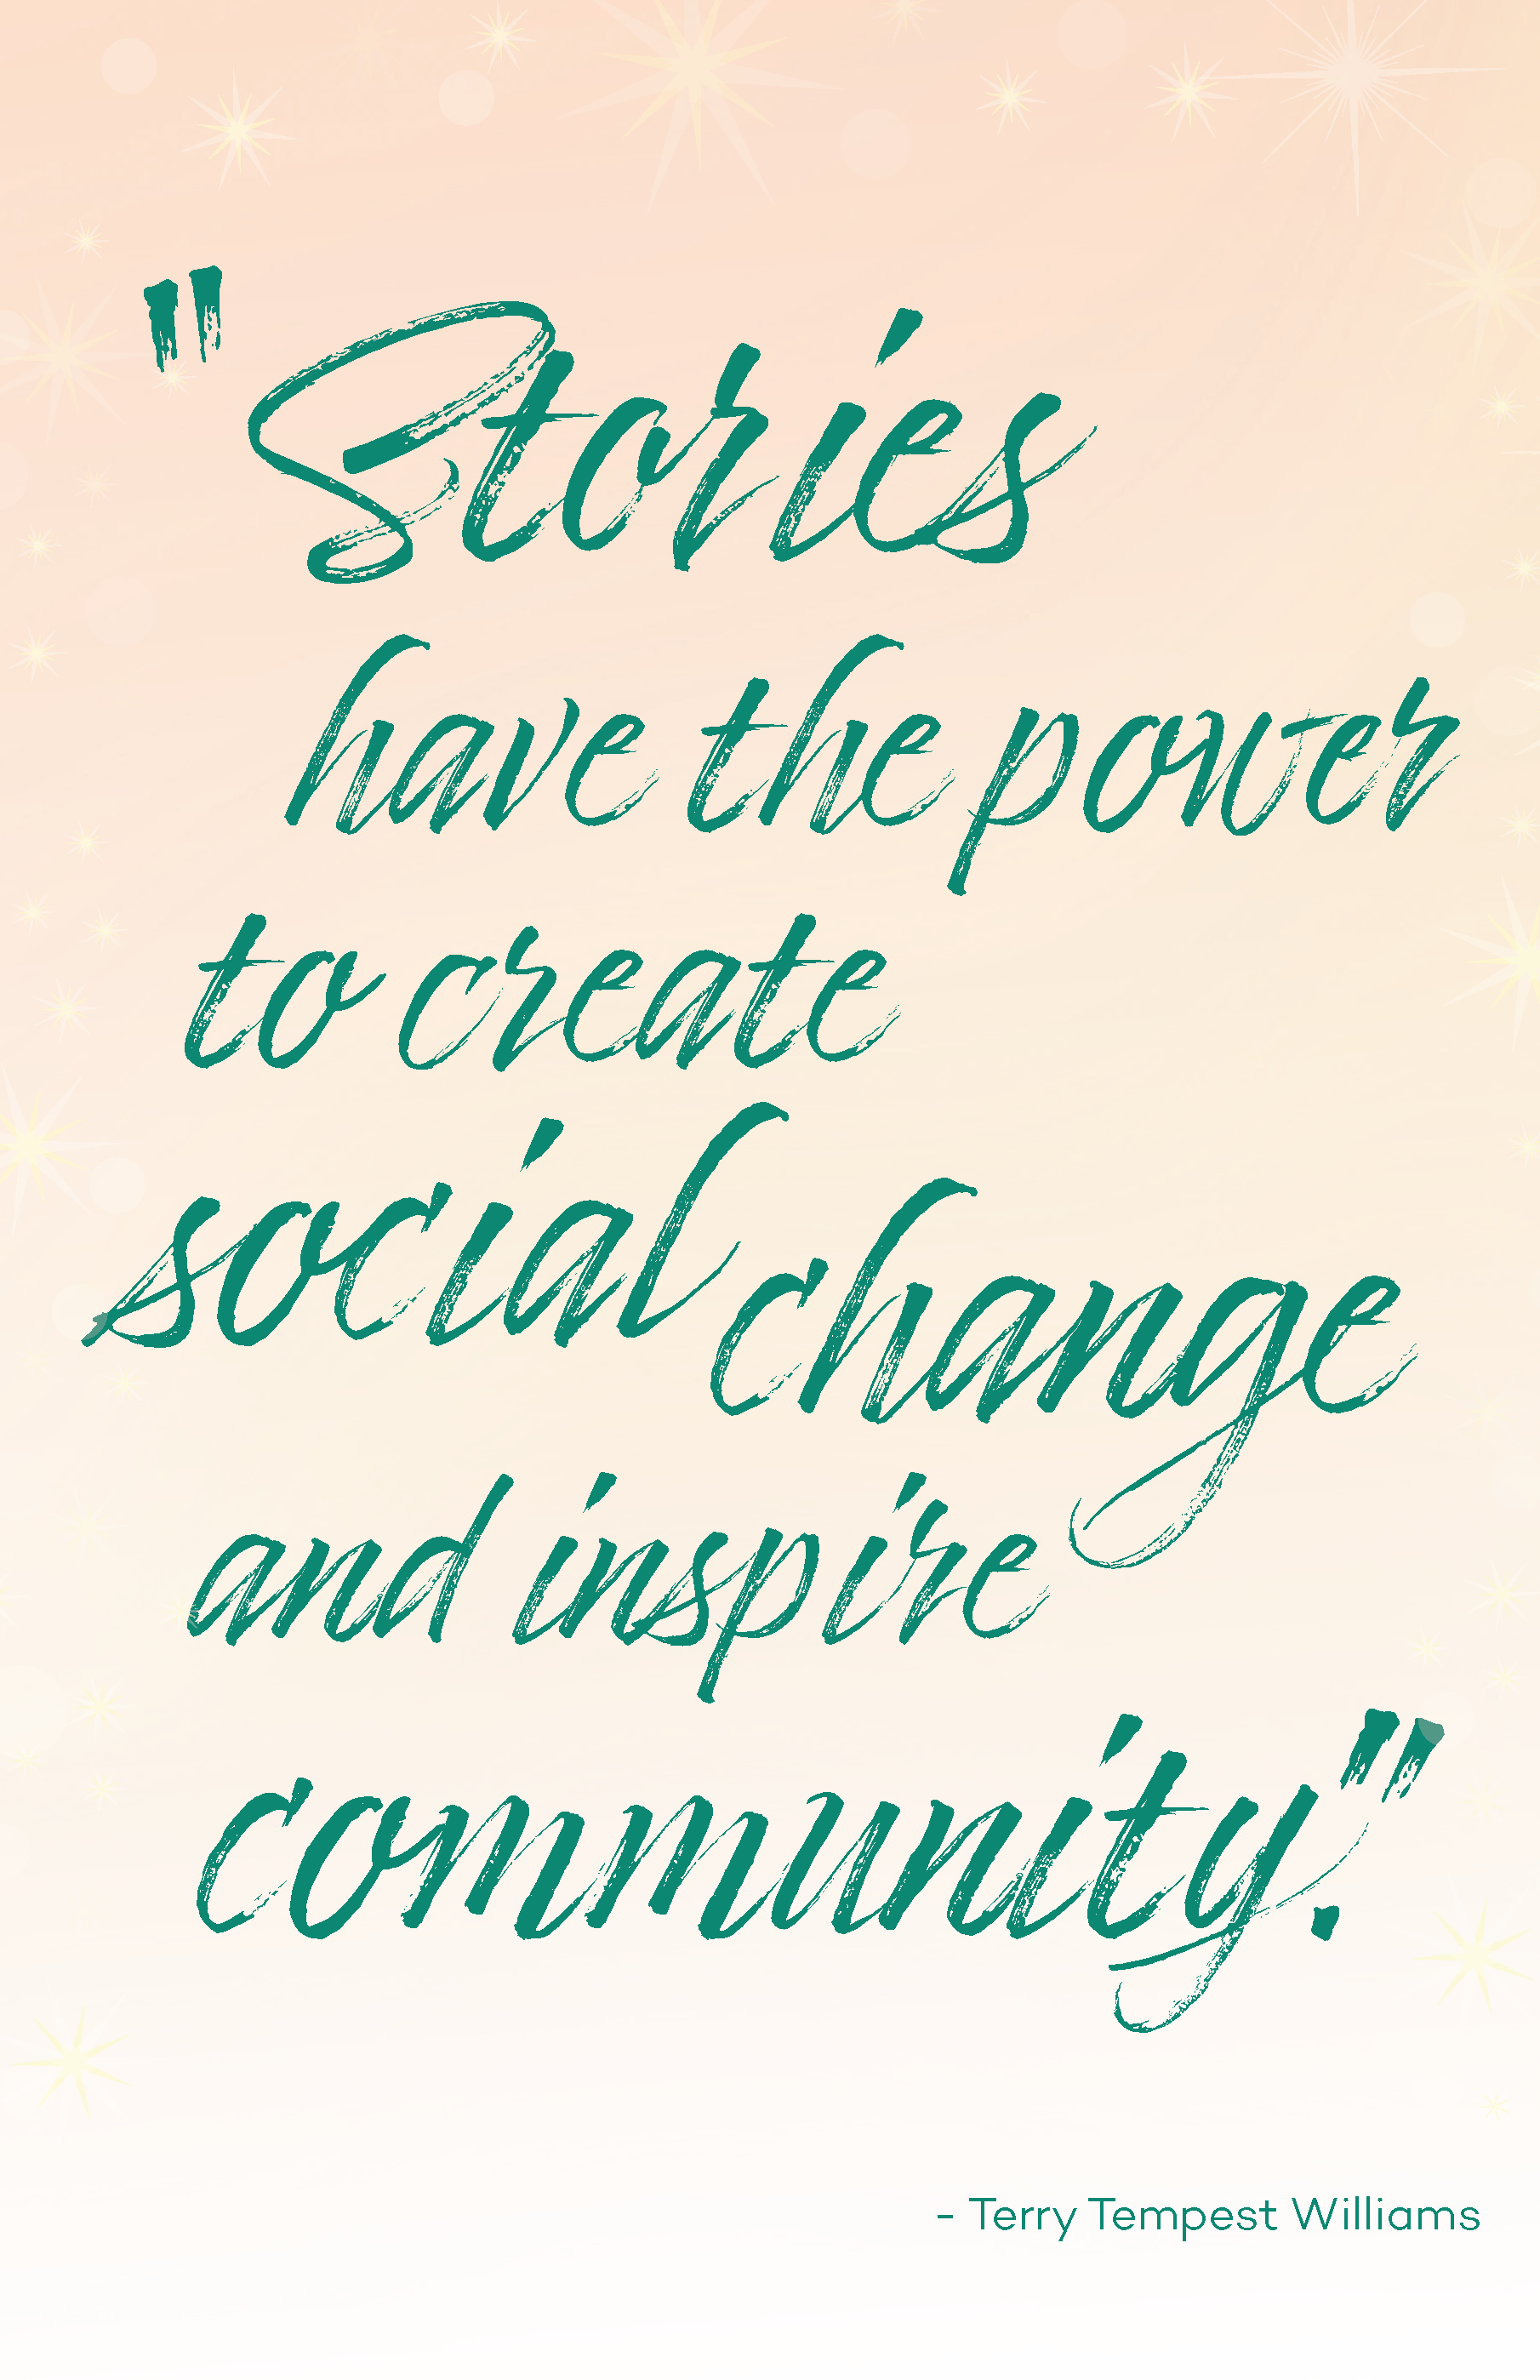 Stories have the power to create social change and inspire community